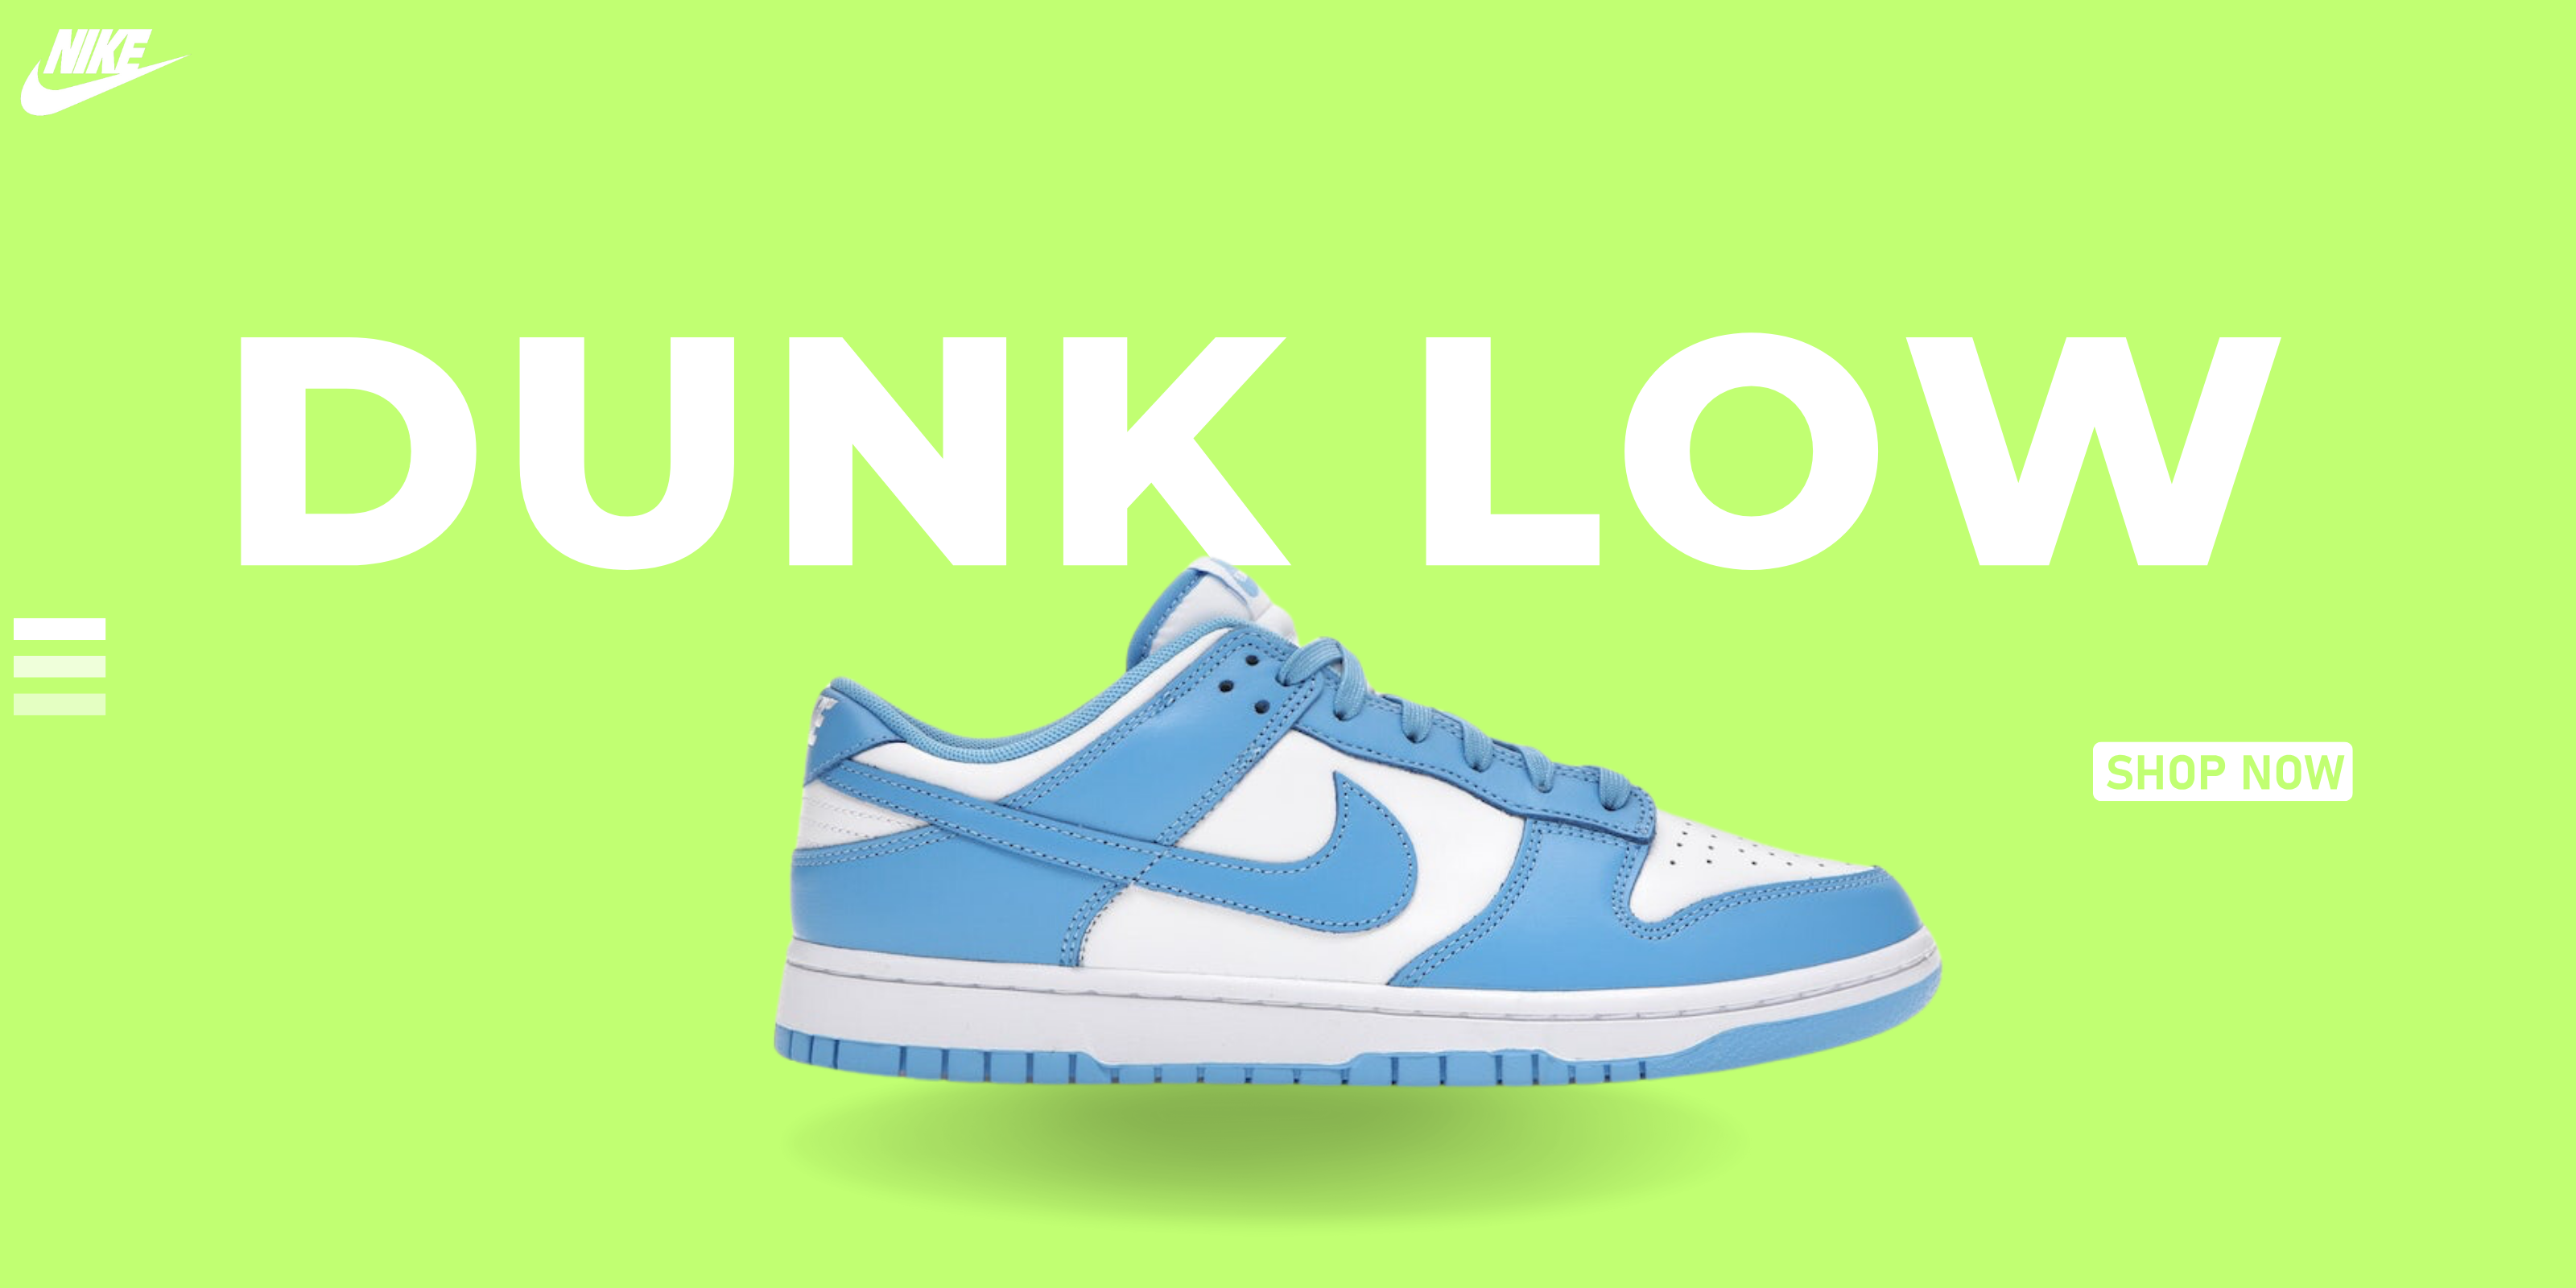 Dunk Lows